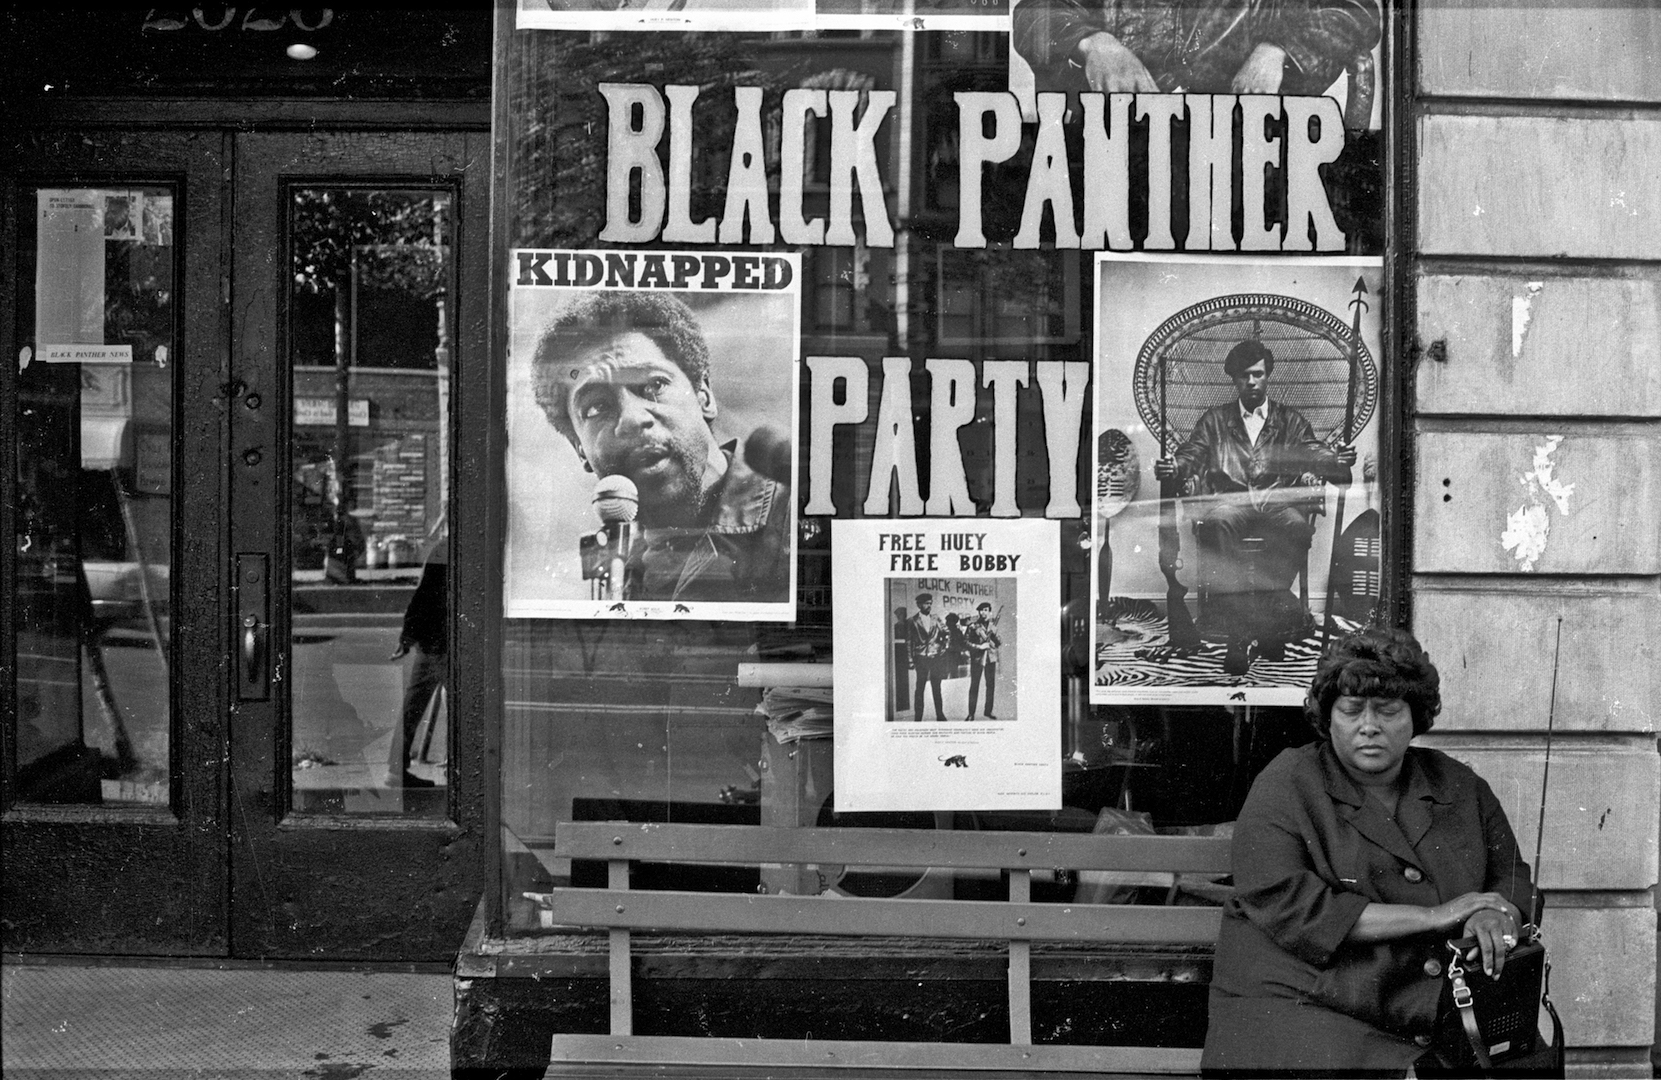 What was the Black Panther Party?